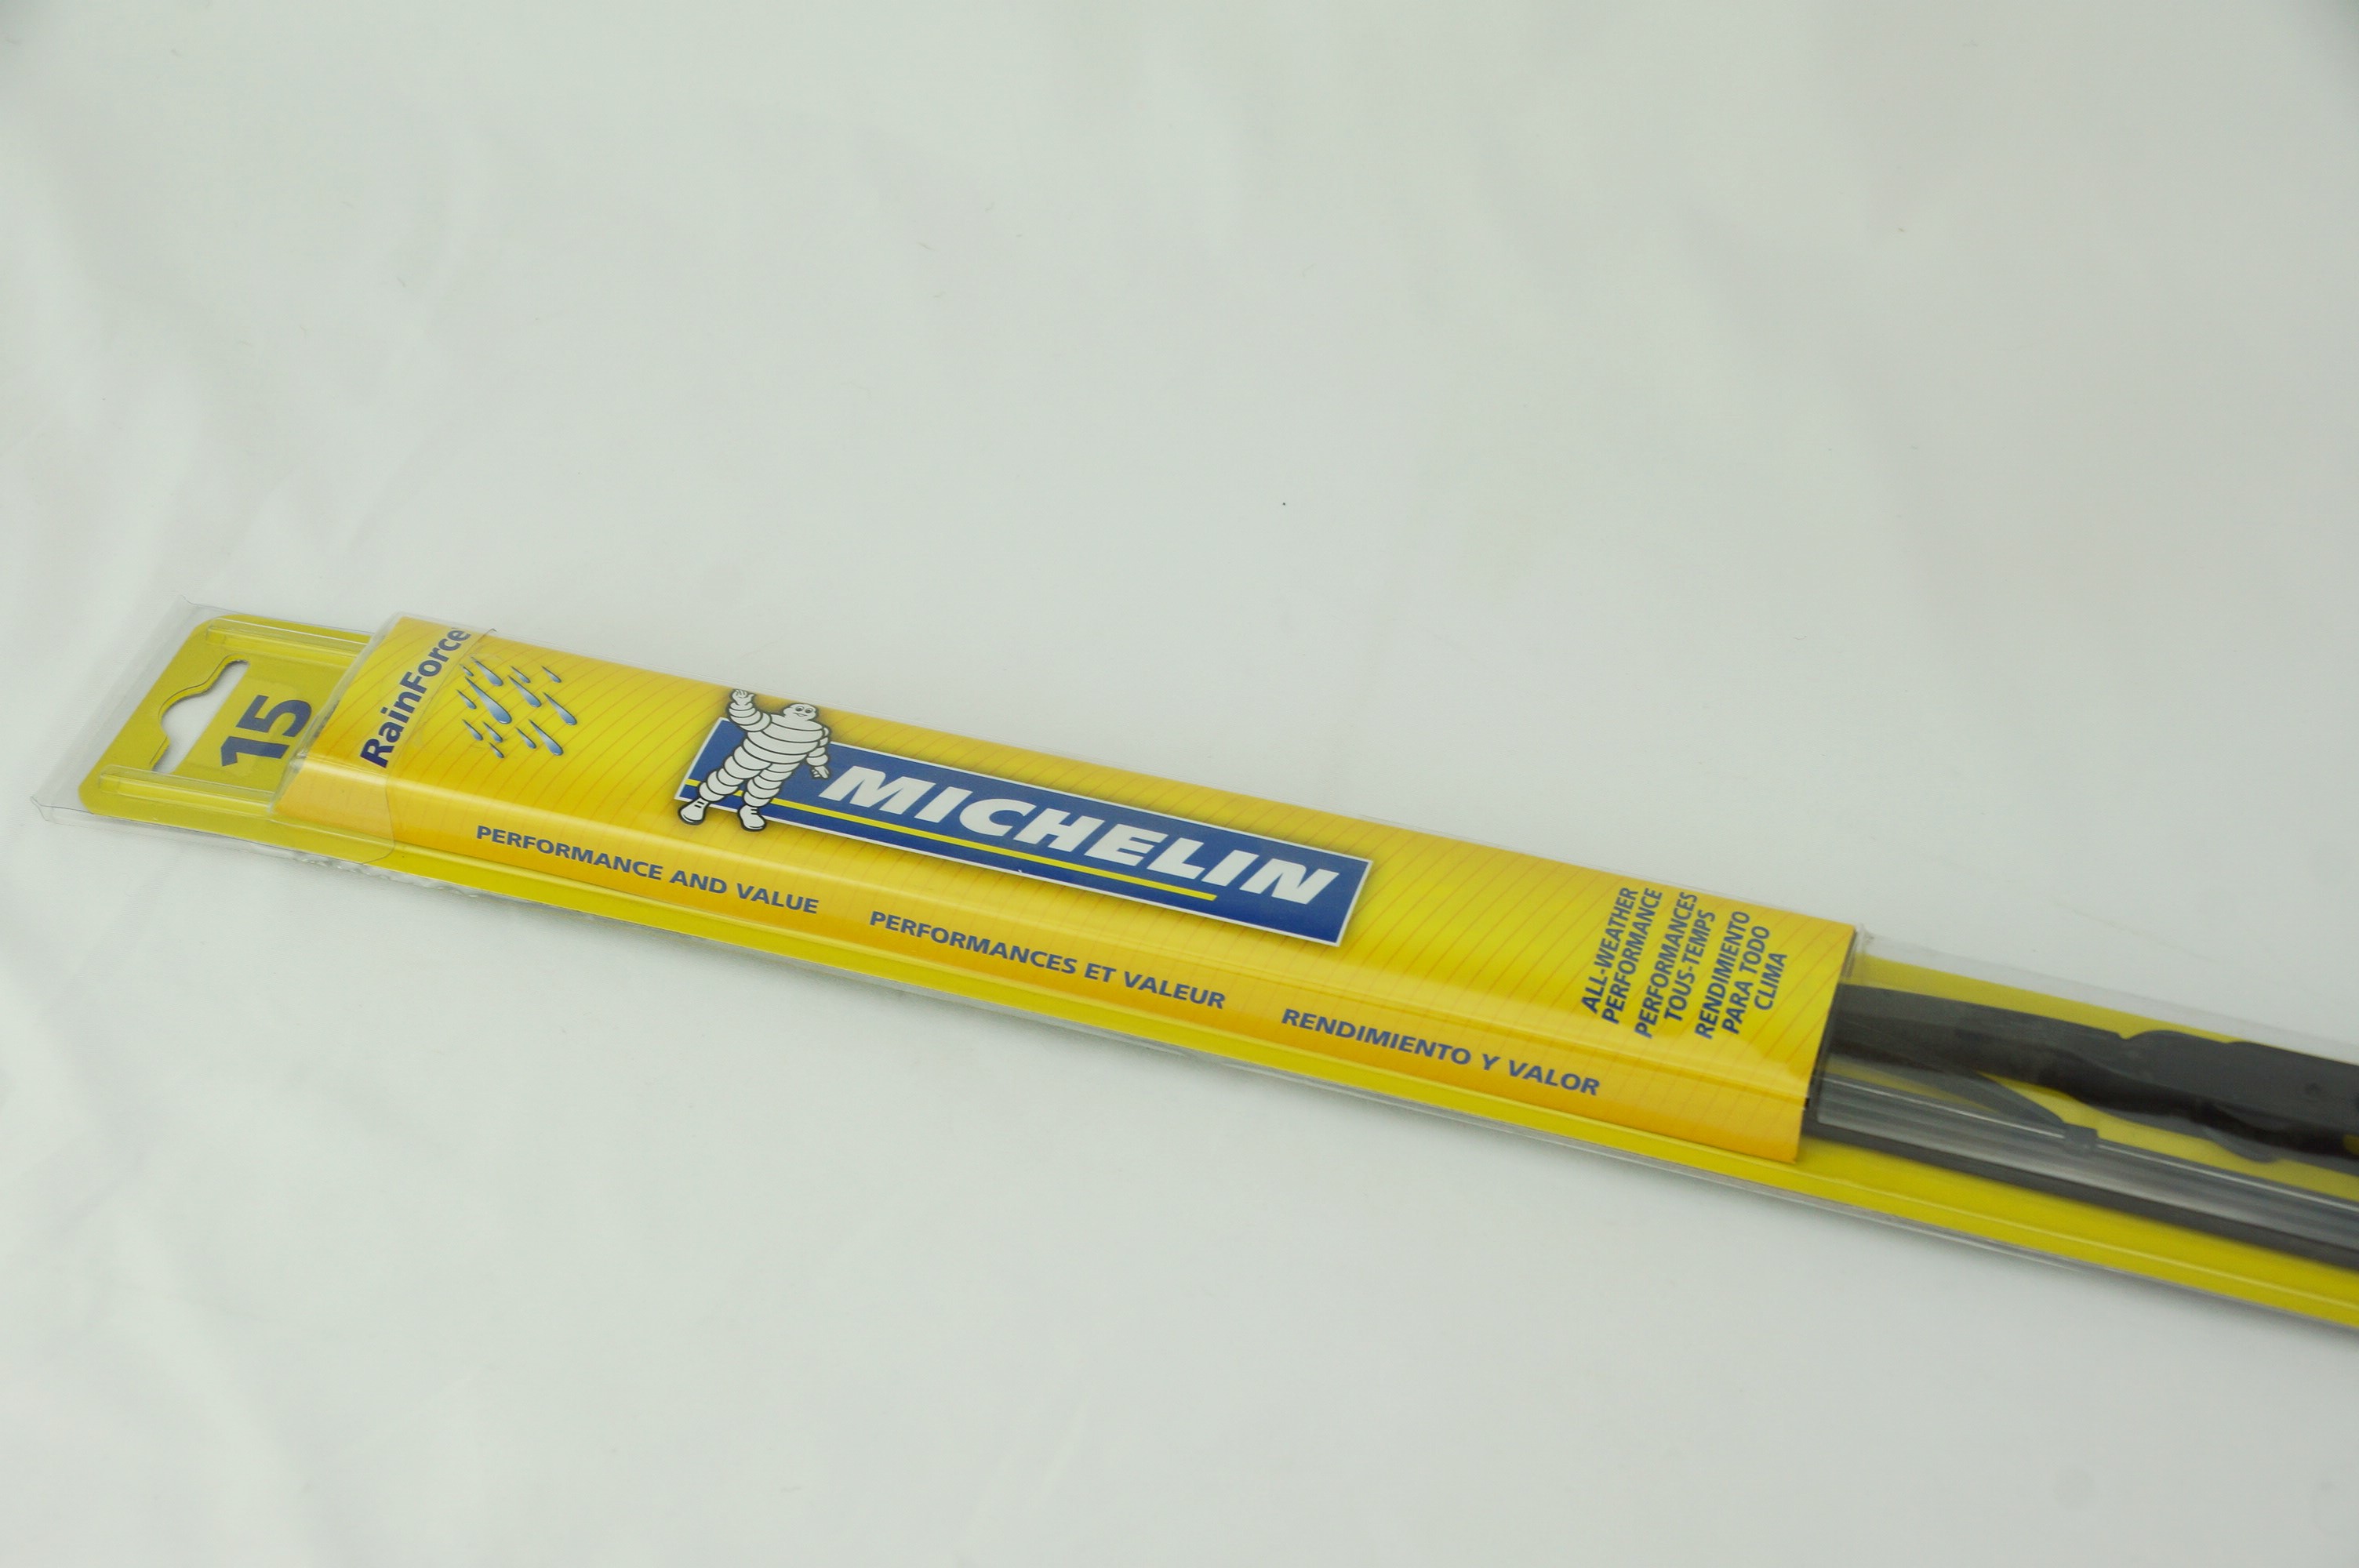 Michelin 3715 RainForce All Weather Performance Series Wiper Blade 15 inch 380mm - image 3